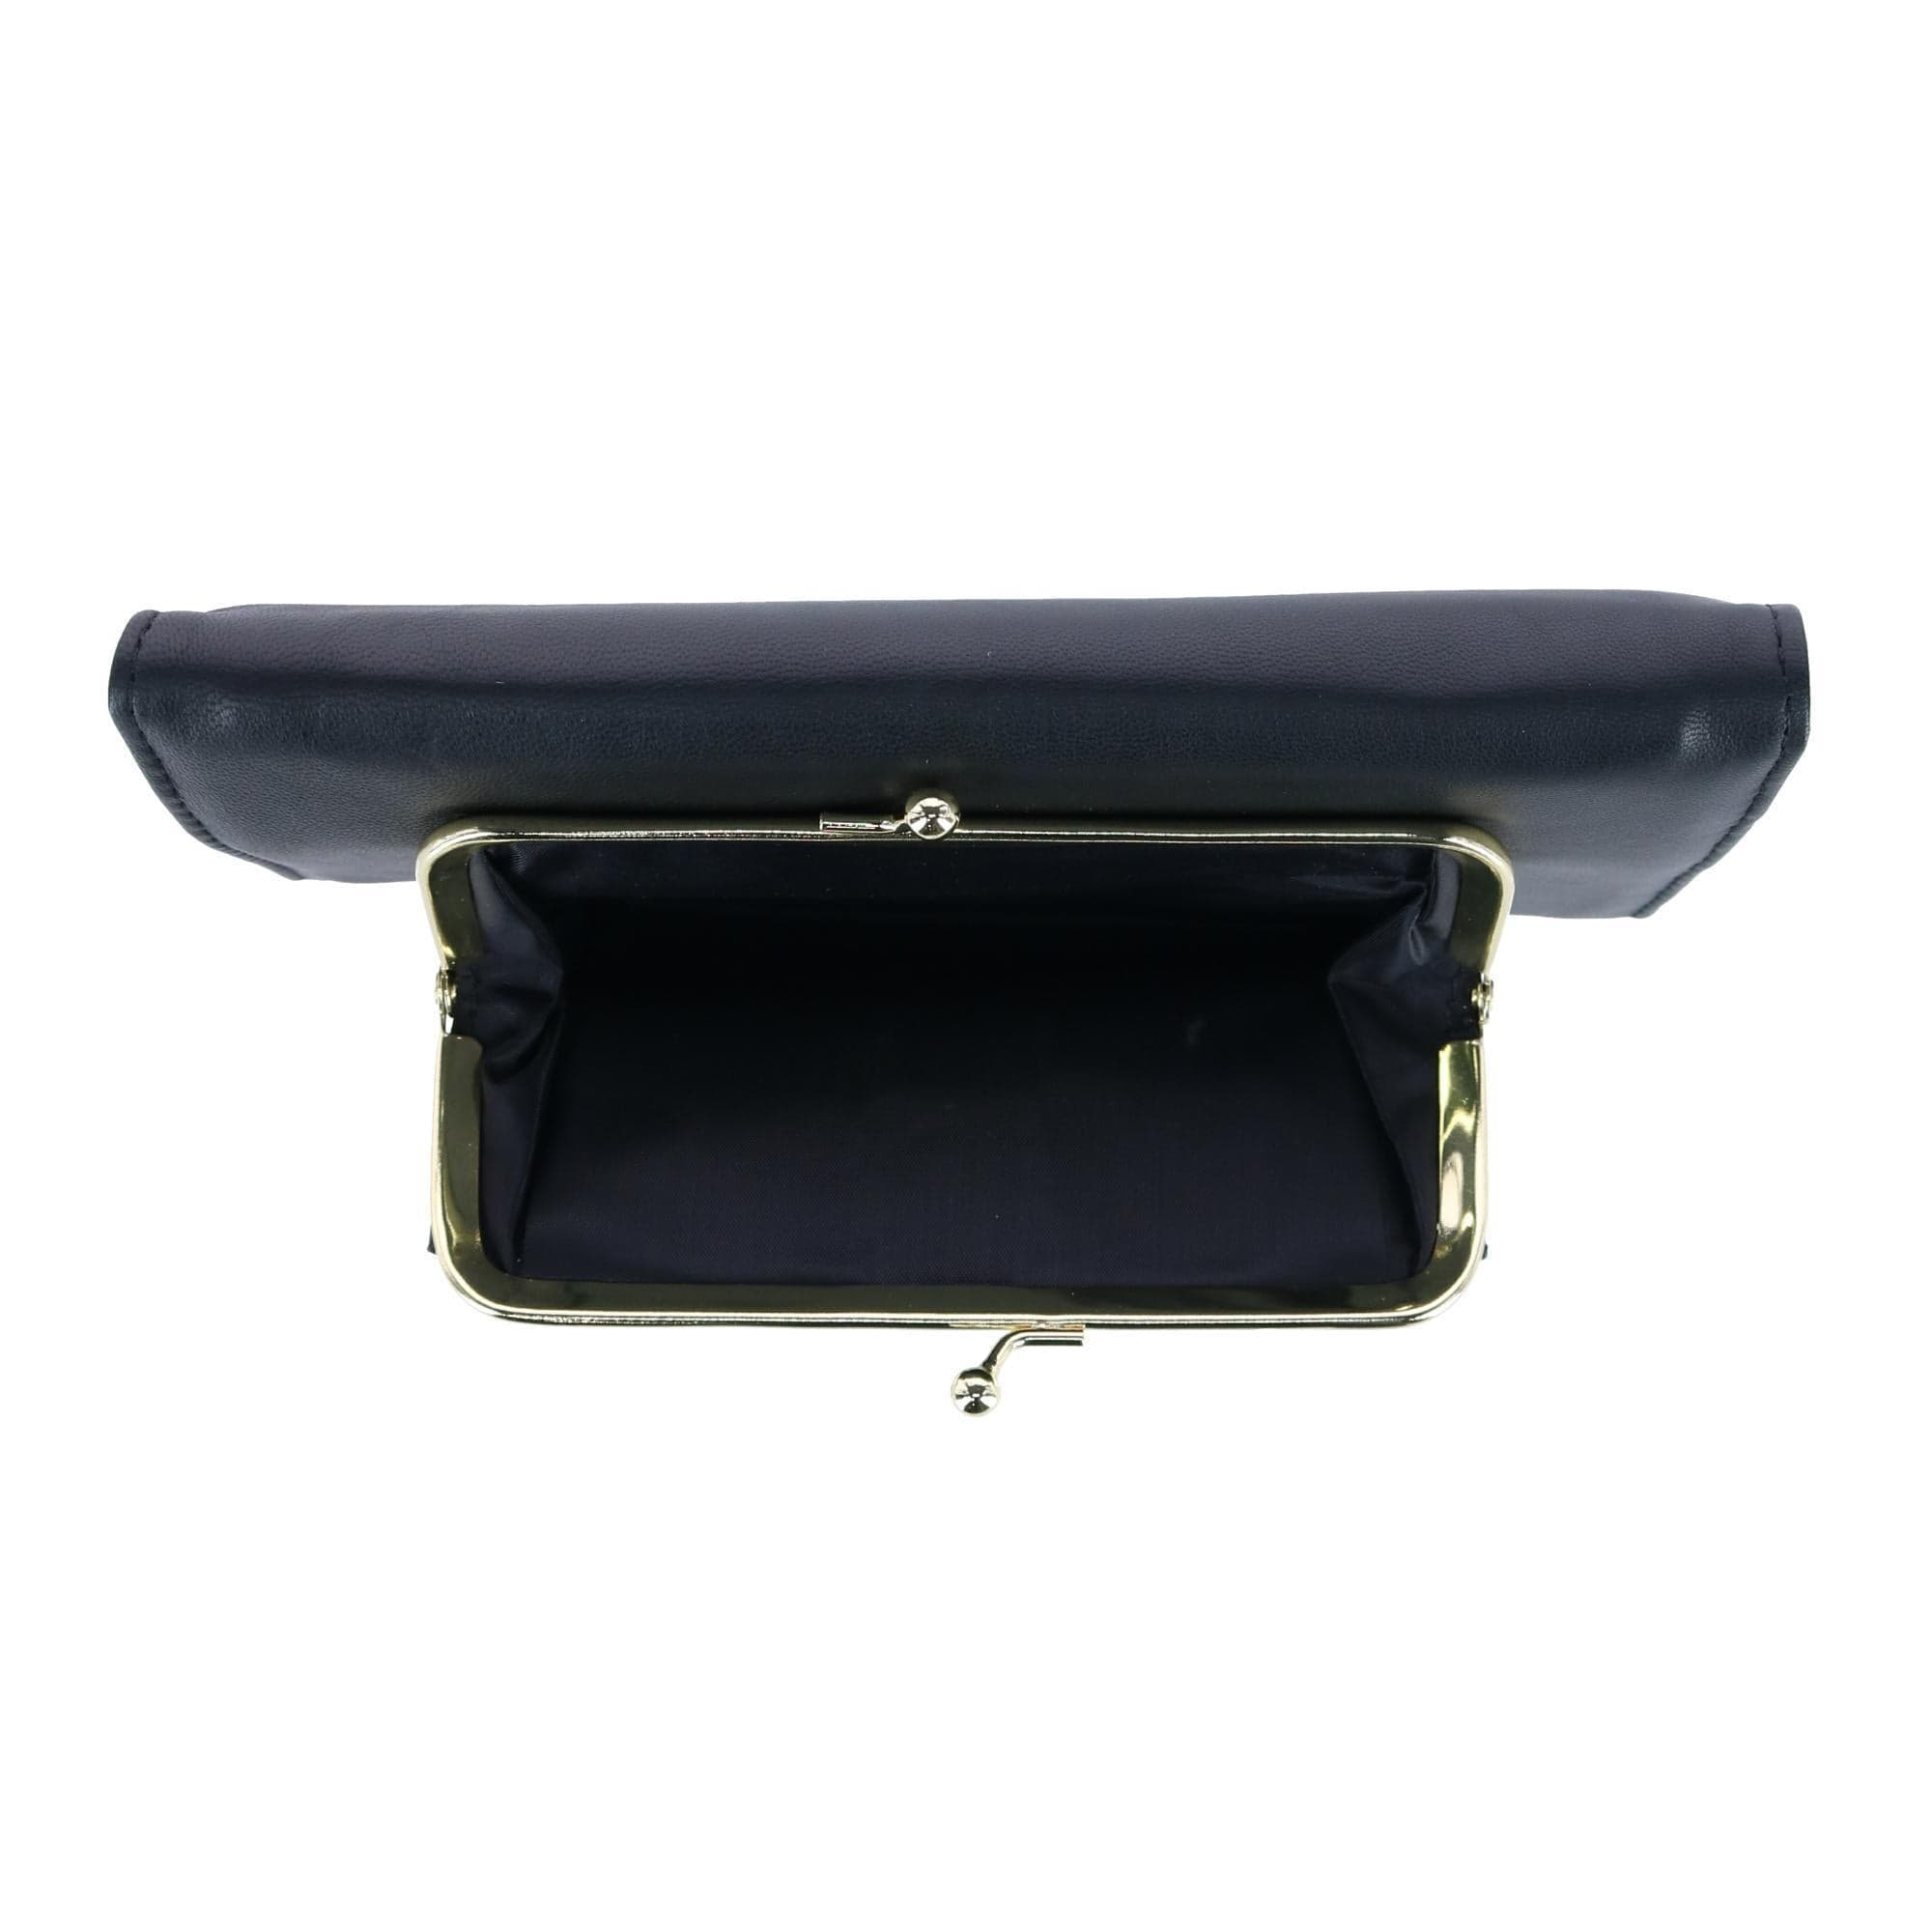  MIRRORLET BLACK WALLET WITH MIRROR AND COMB at Introductory  Price. Zippered, It's a UNISEX Purse, PU Leather, Bifold Wallet. (MIRROR BLACK  WALLET) : Clothing, Shoes & Jewelry